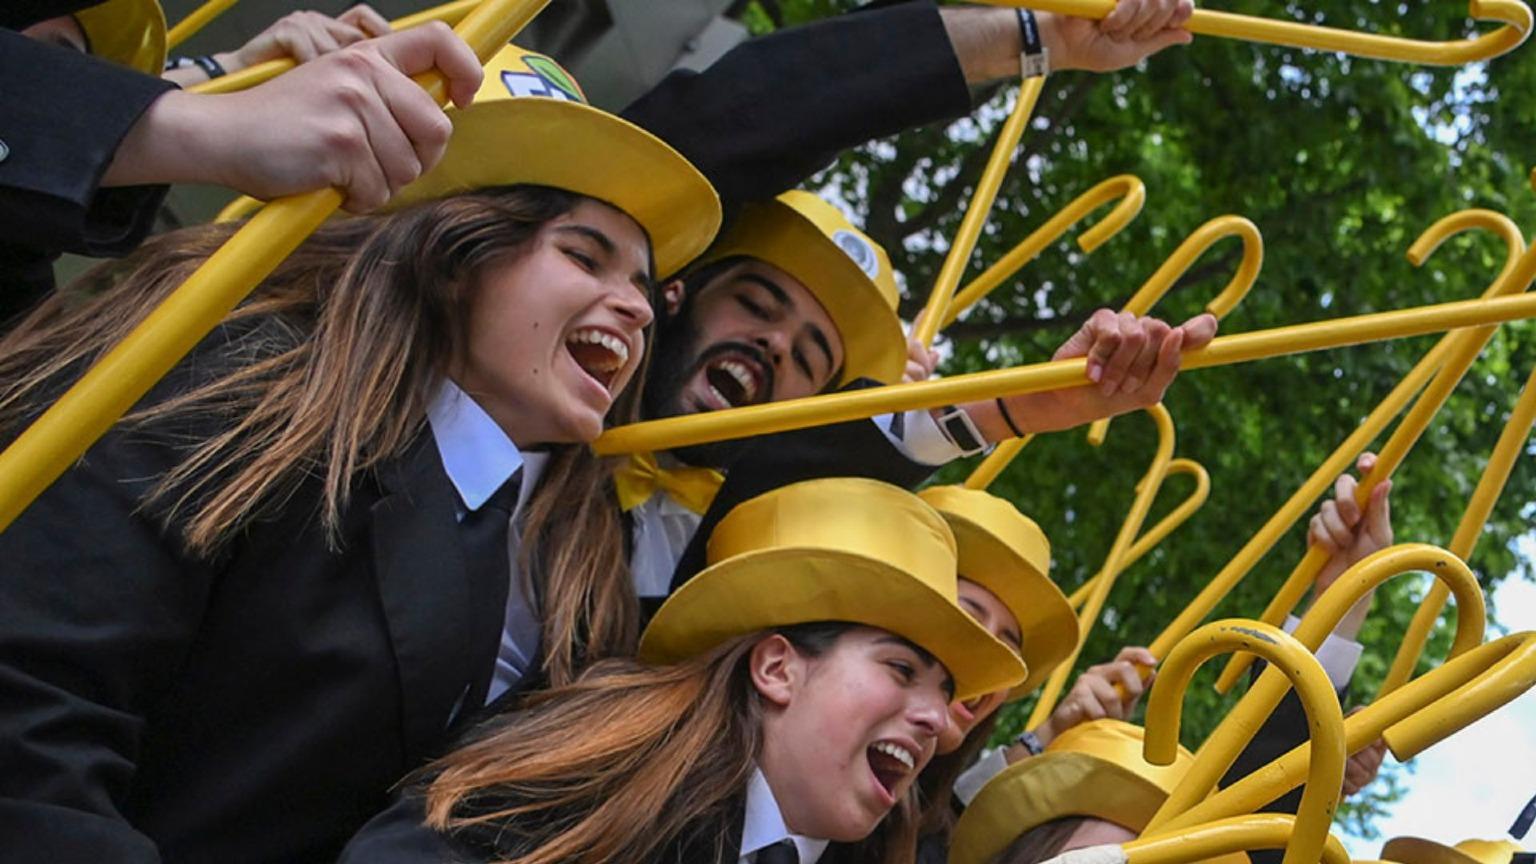 Students in traditional academic attire, wearing yellow hats and holding sticks, celebrate at Queima das Fitas in Porto